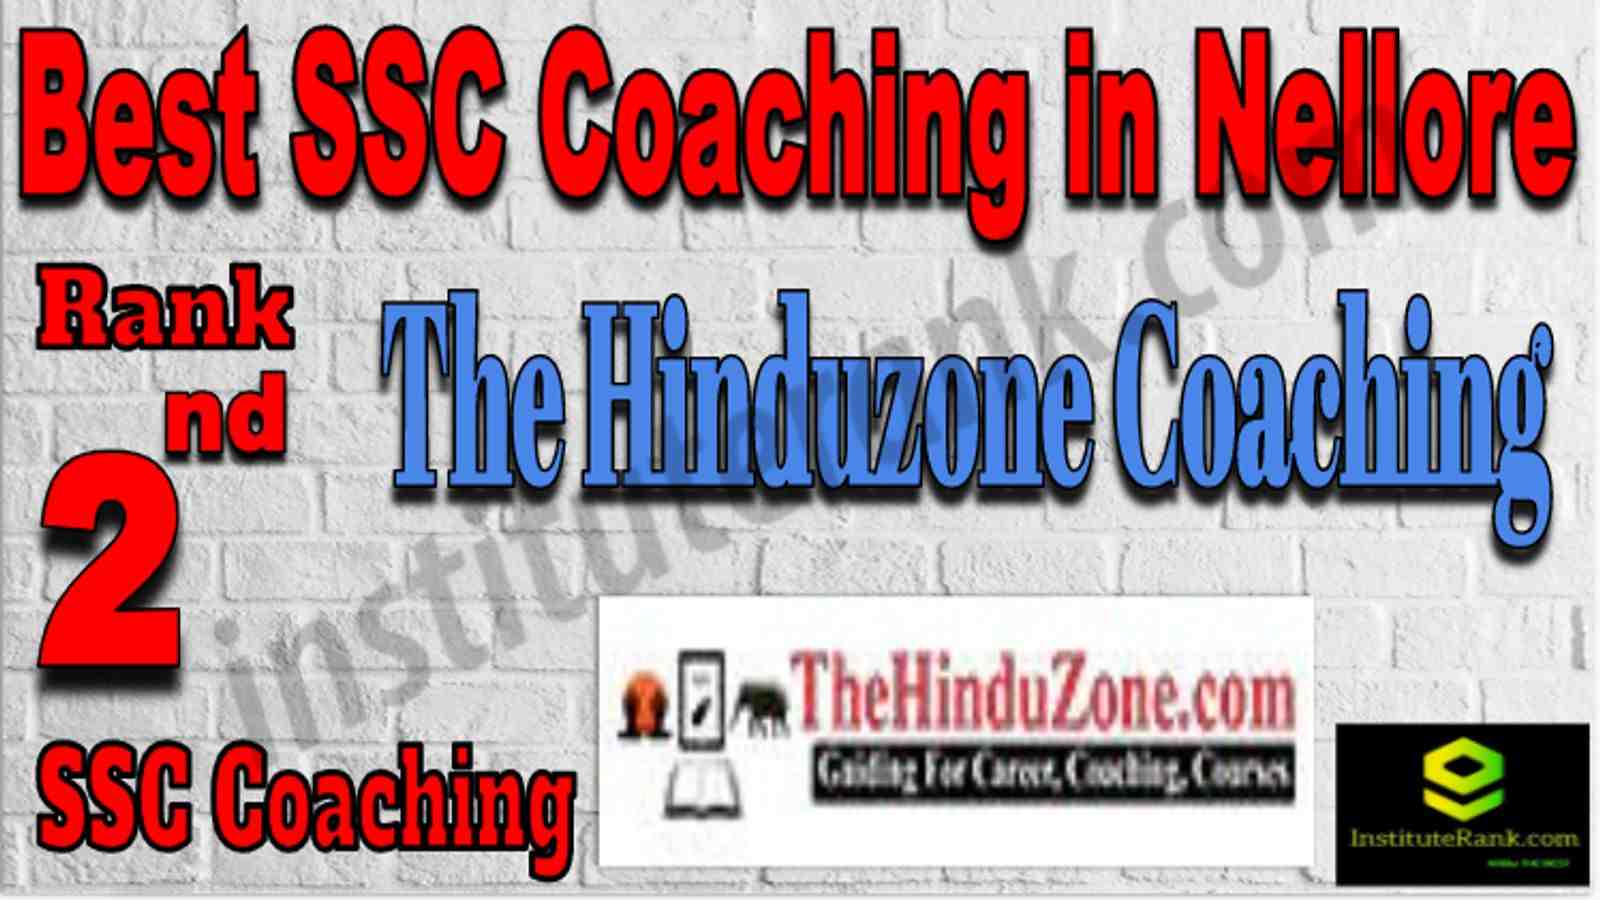 Rank 2 Best SSC Coaching in Nellore